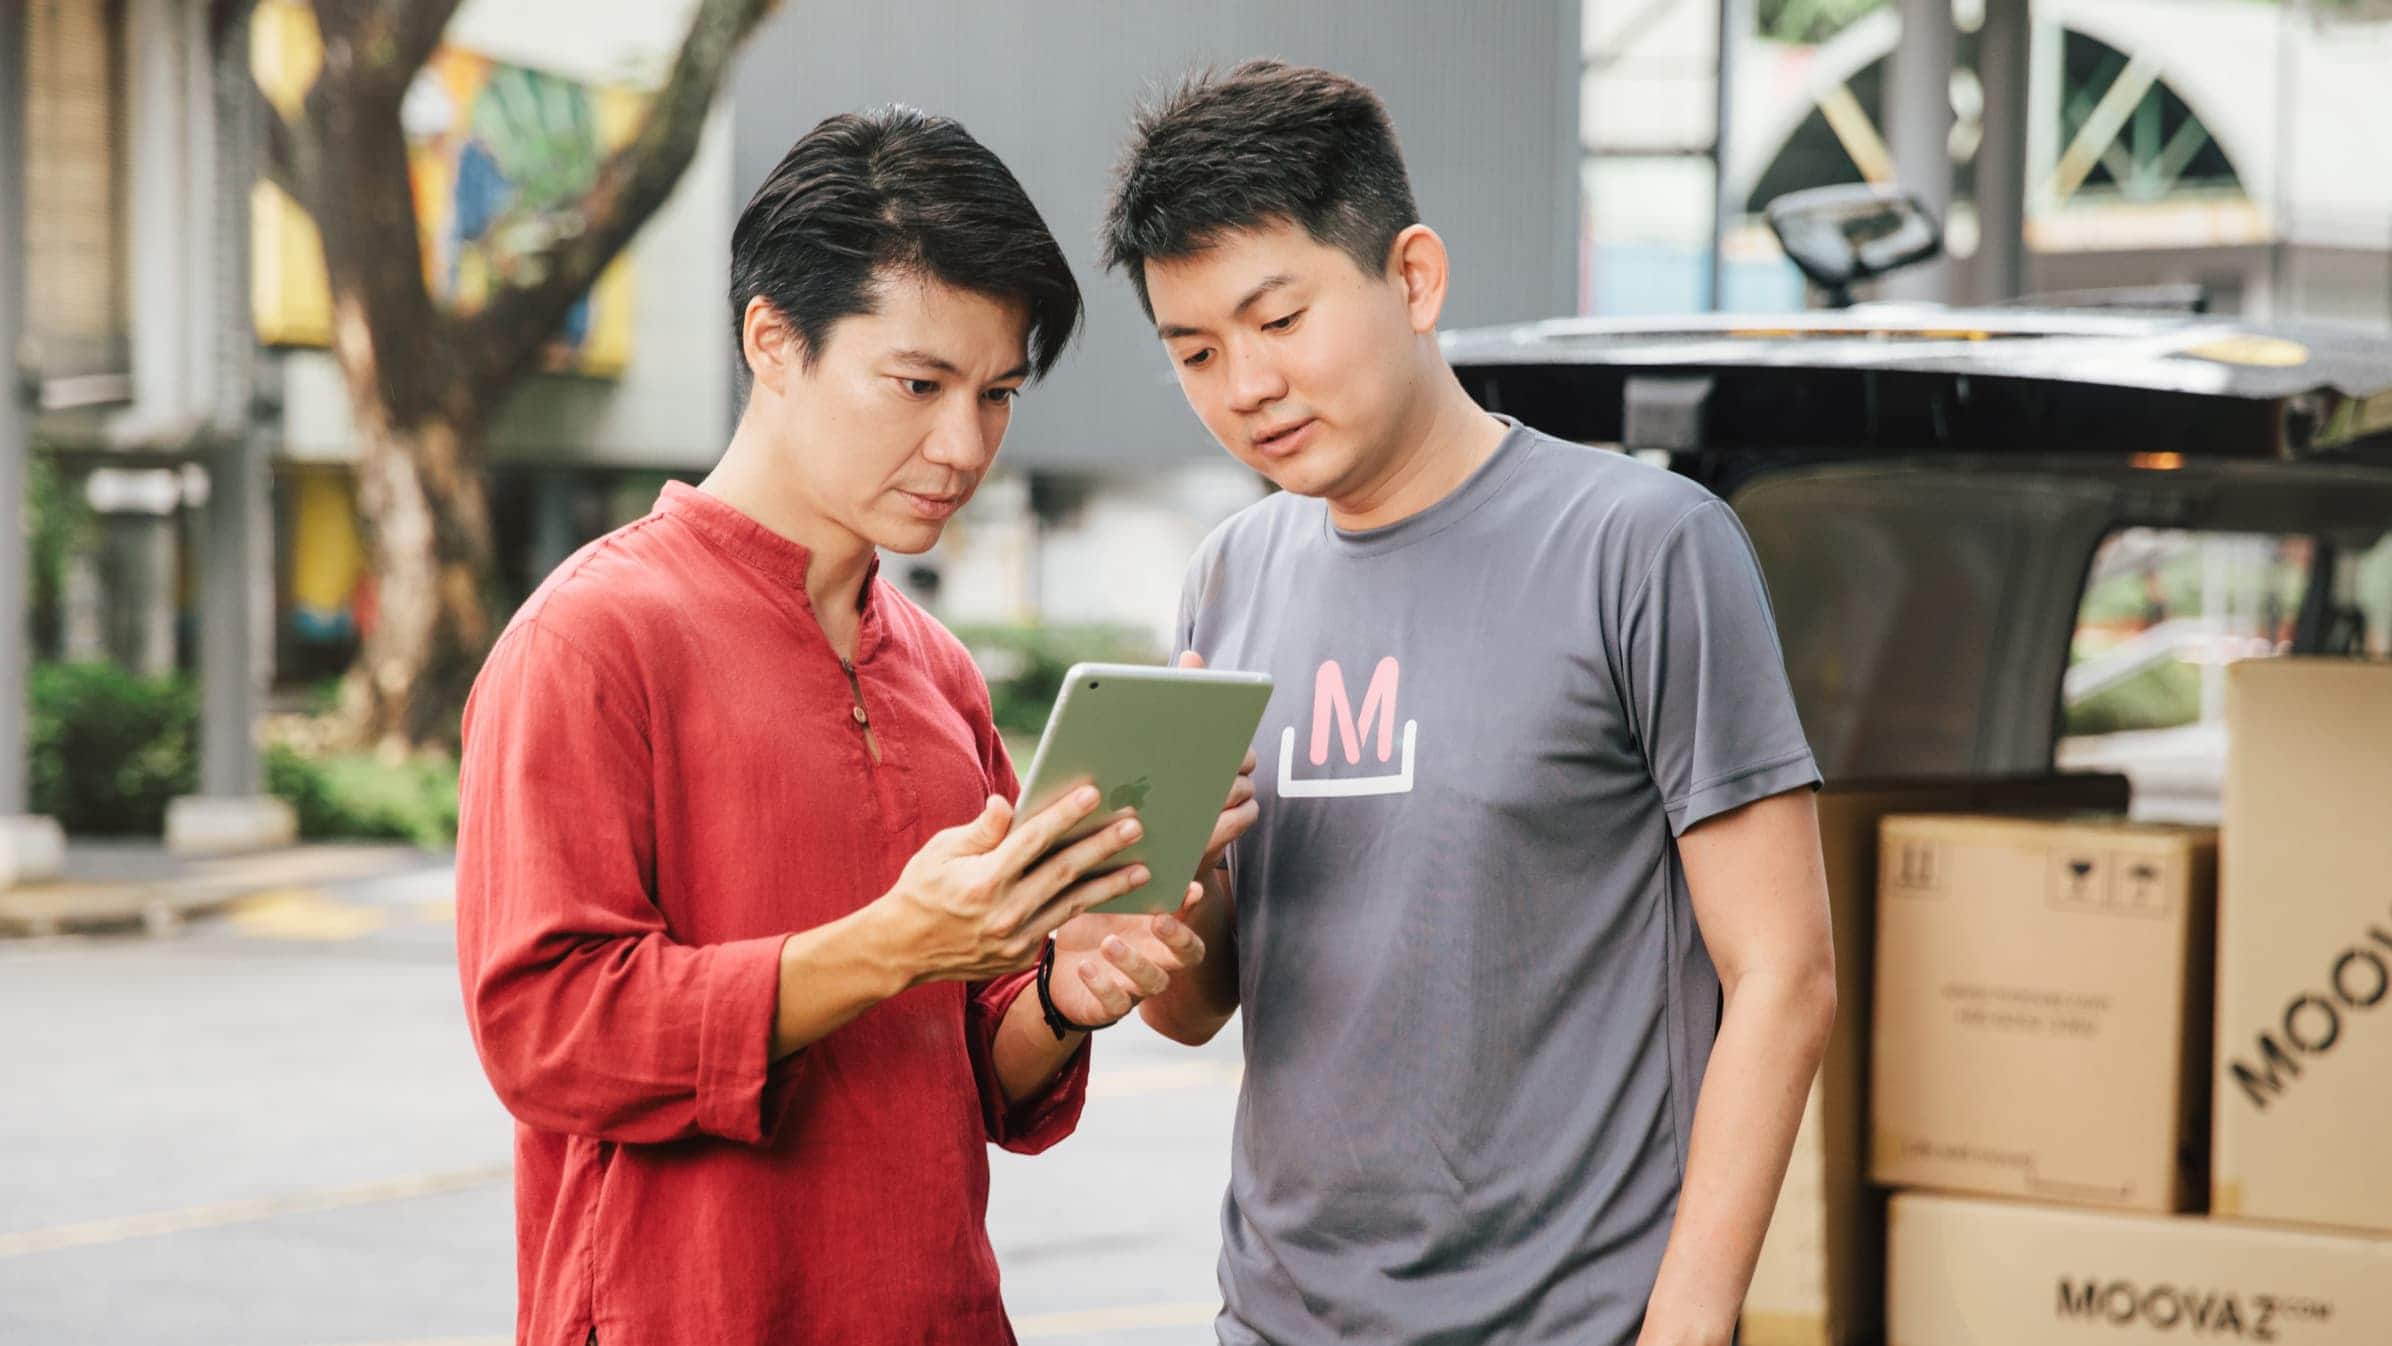 Junxian Lee, Co-founder and CEO of Moovaz, showing a tablet device to a colleague while standing beside a moving van.